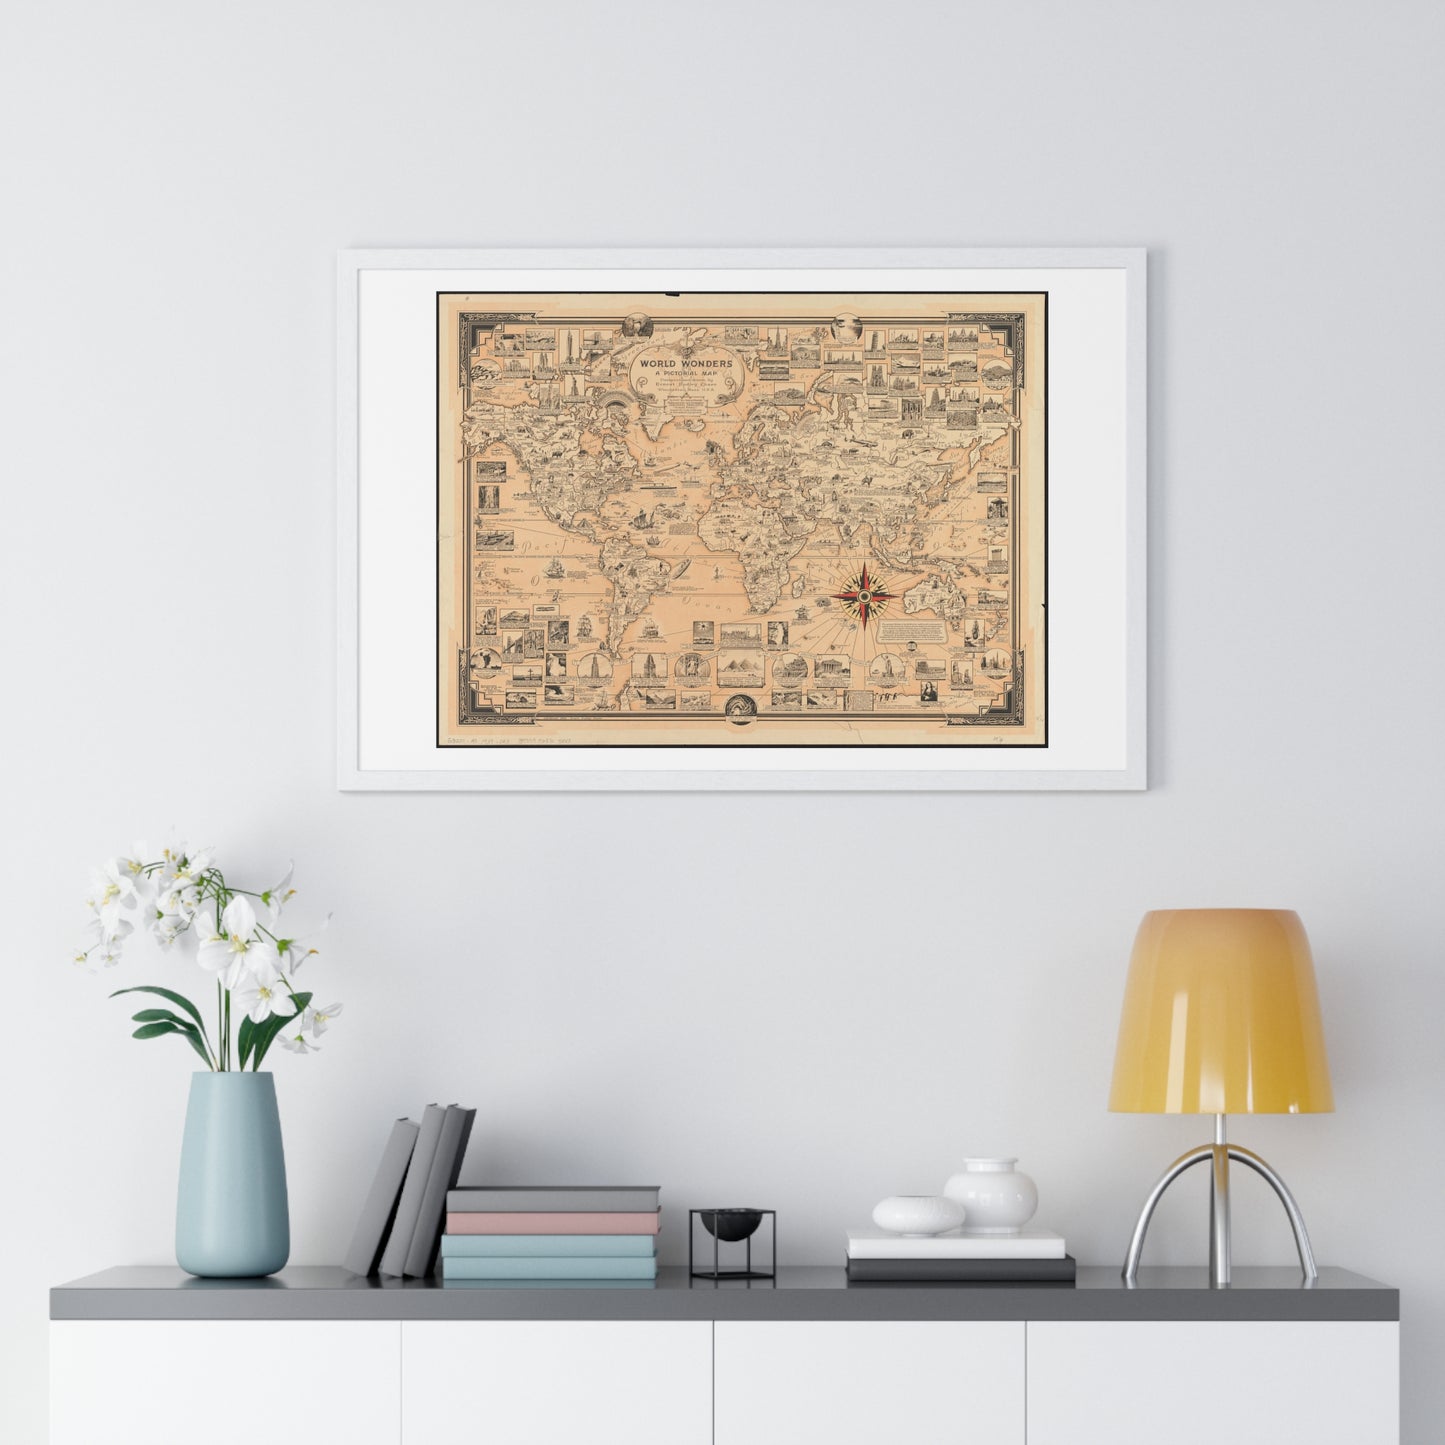 World Wonders, Pictorial Map of the World (1939) by Ernest Dudley Chase, from the Original, Framed Art Print